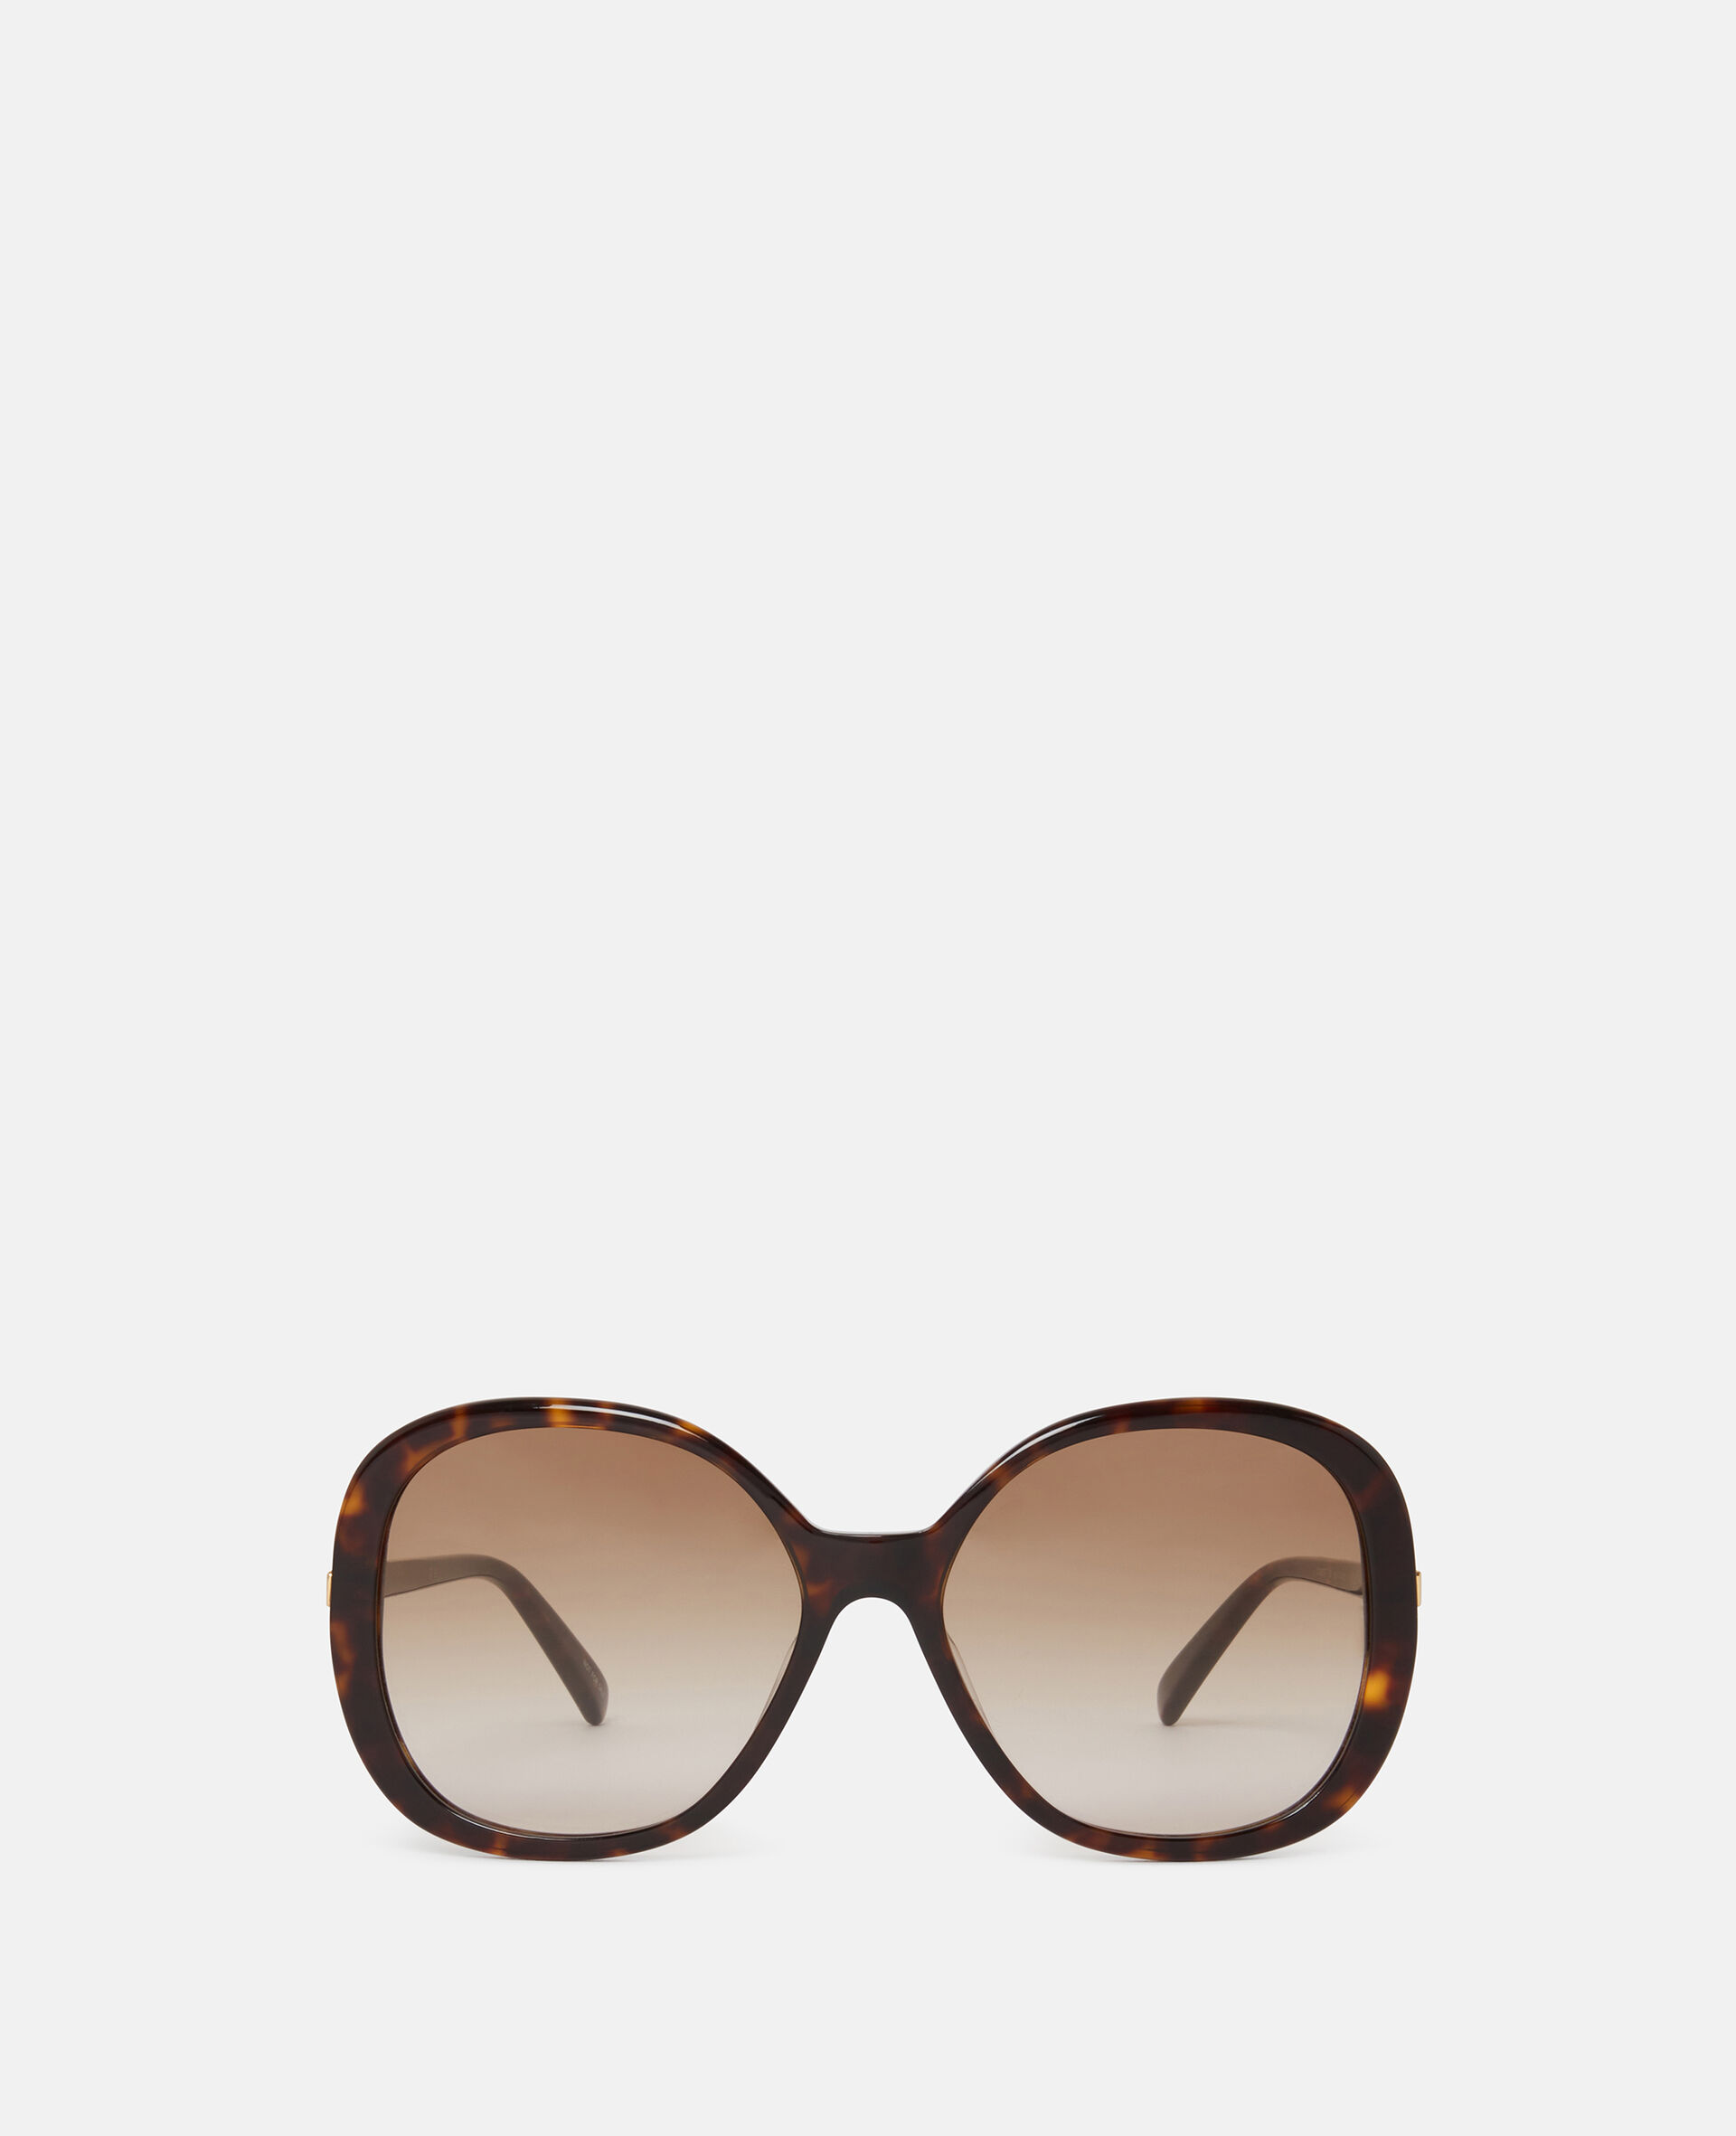 Oversized Round Gradient Sunglasses-Brown-large image number 0